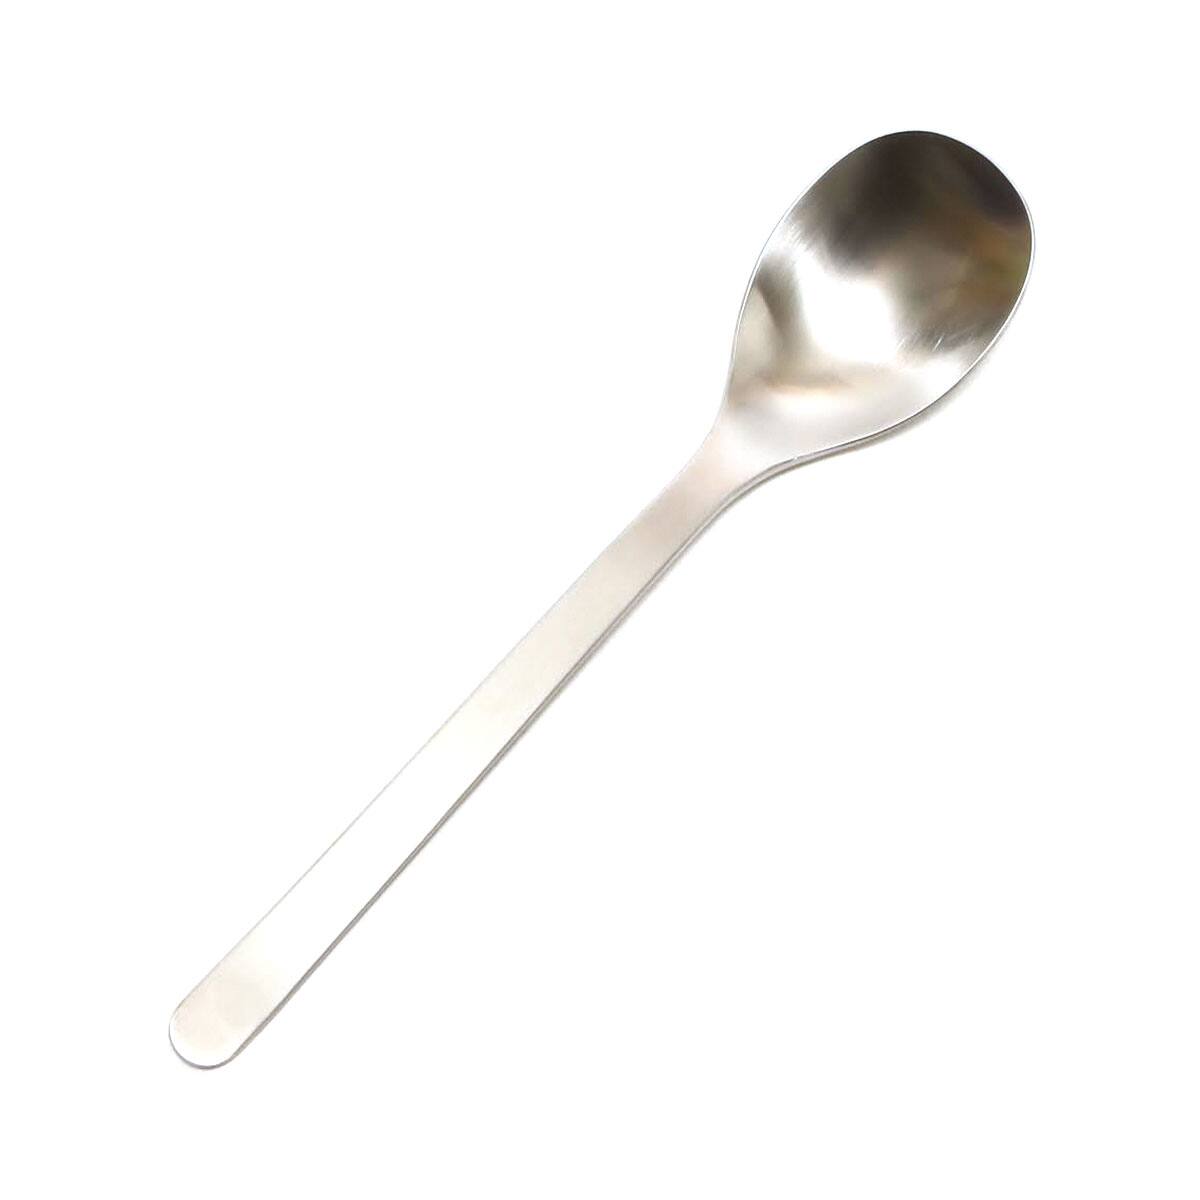 THE NORTH FACE LAND ARMS SPOON SILVER 22SS-I